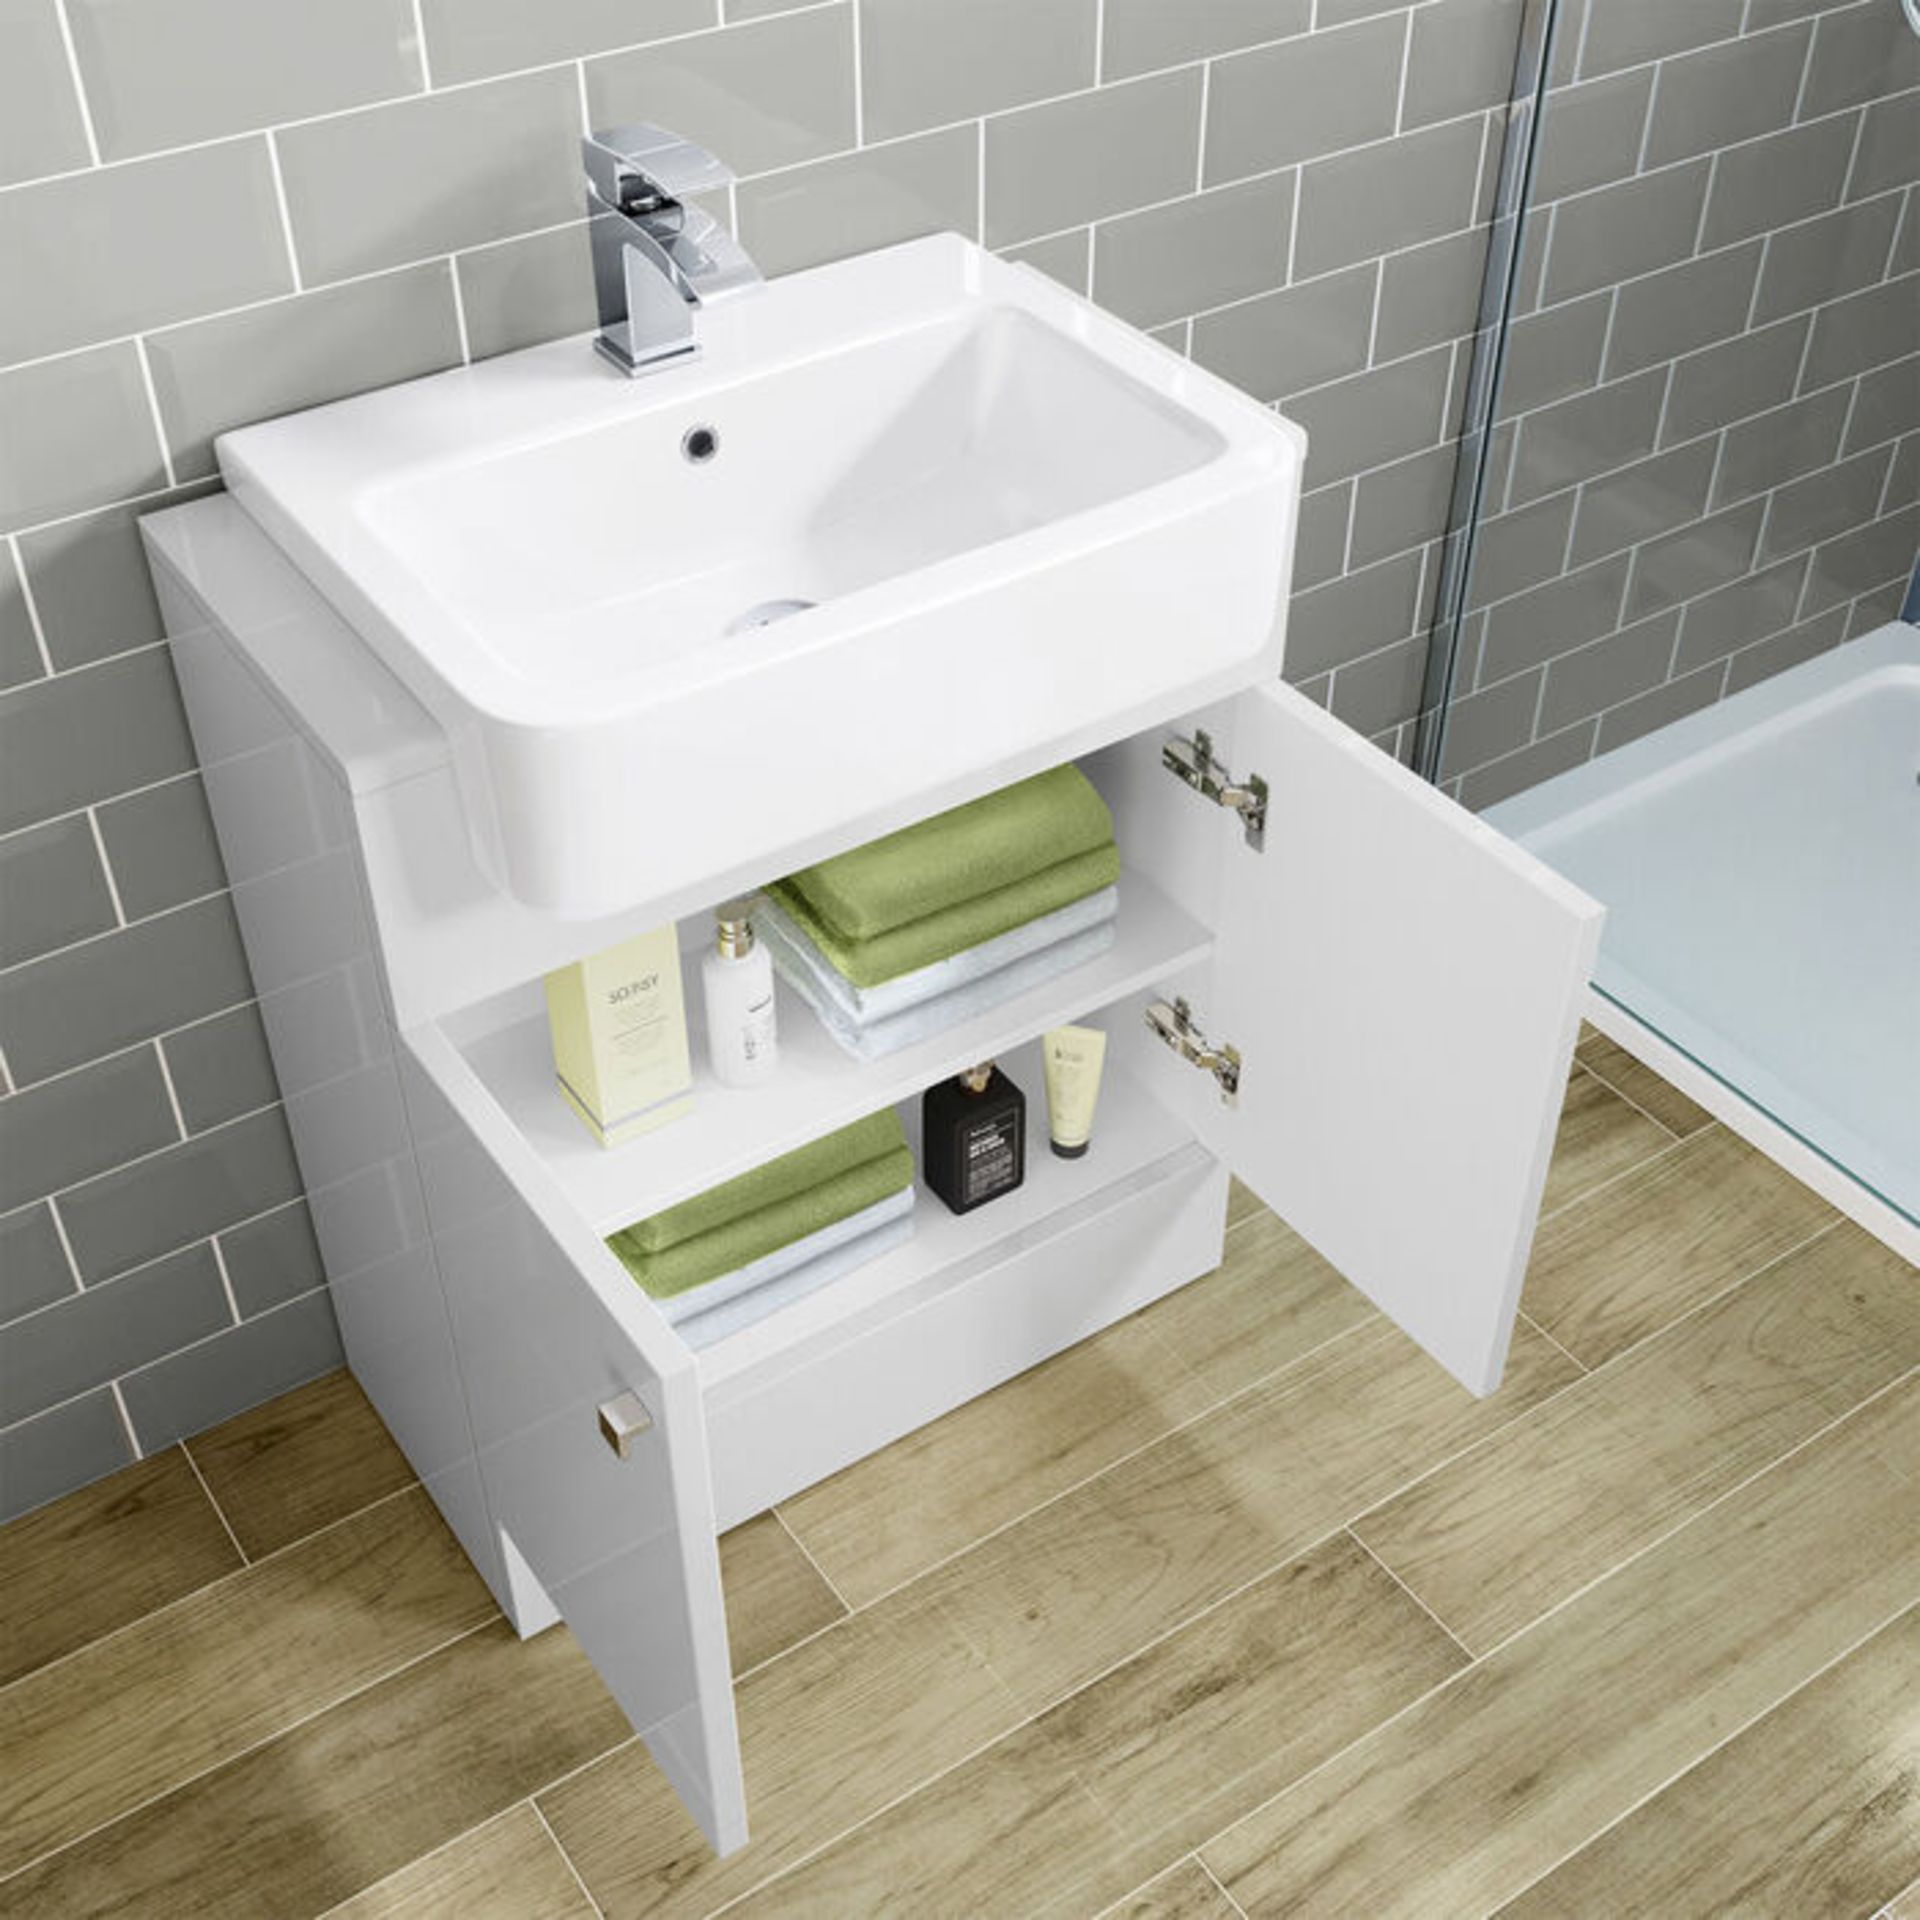 (CE23) 660mm Harper Gloss White Sink Vanity Unit - Floor Standing. RRP £749.99.Comes complete ... - Image 2 of 3